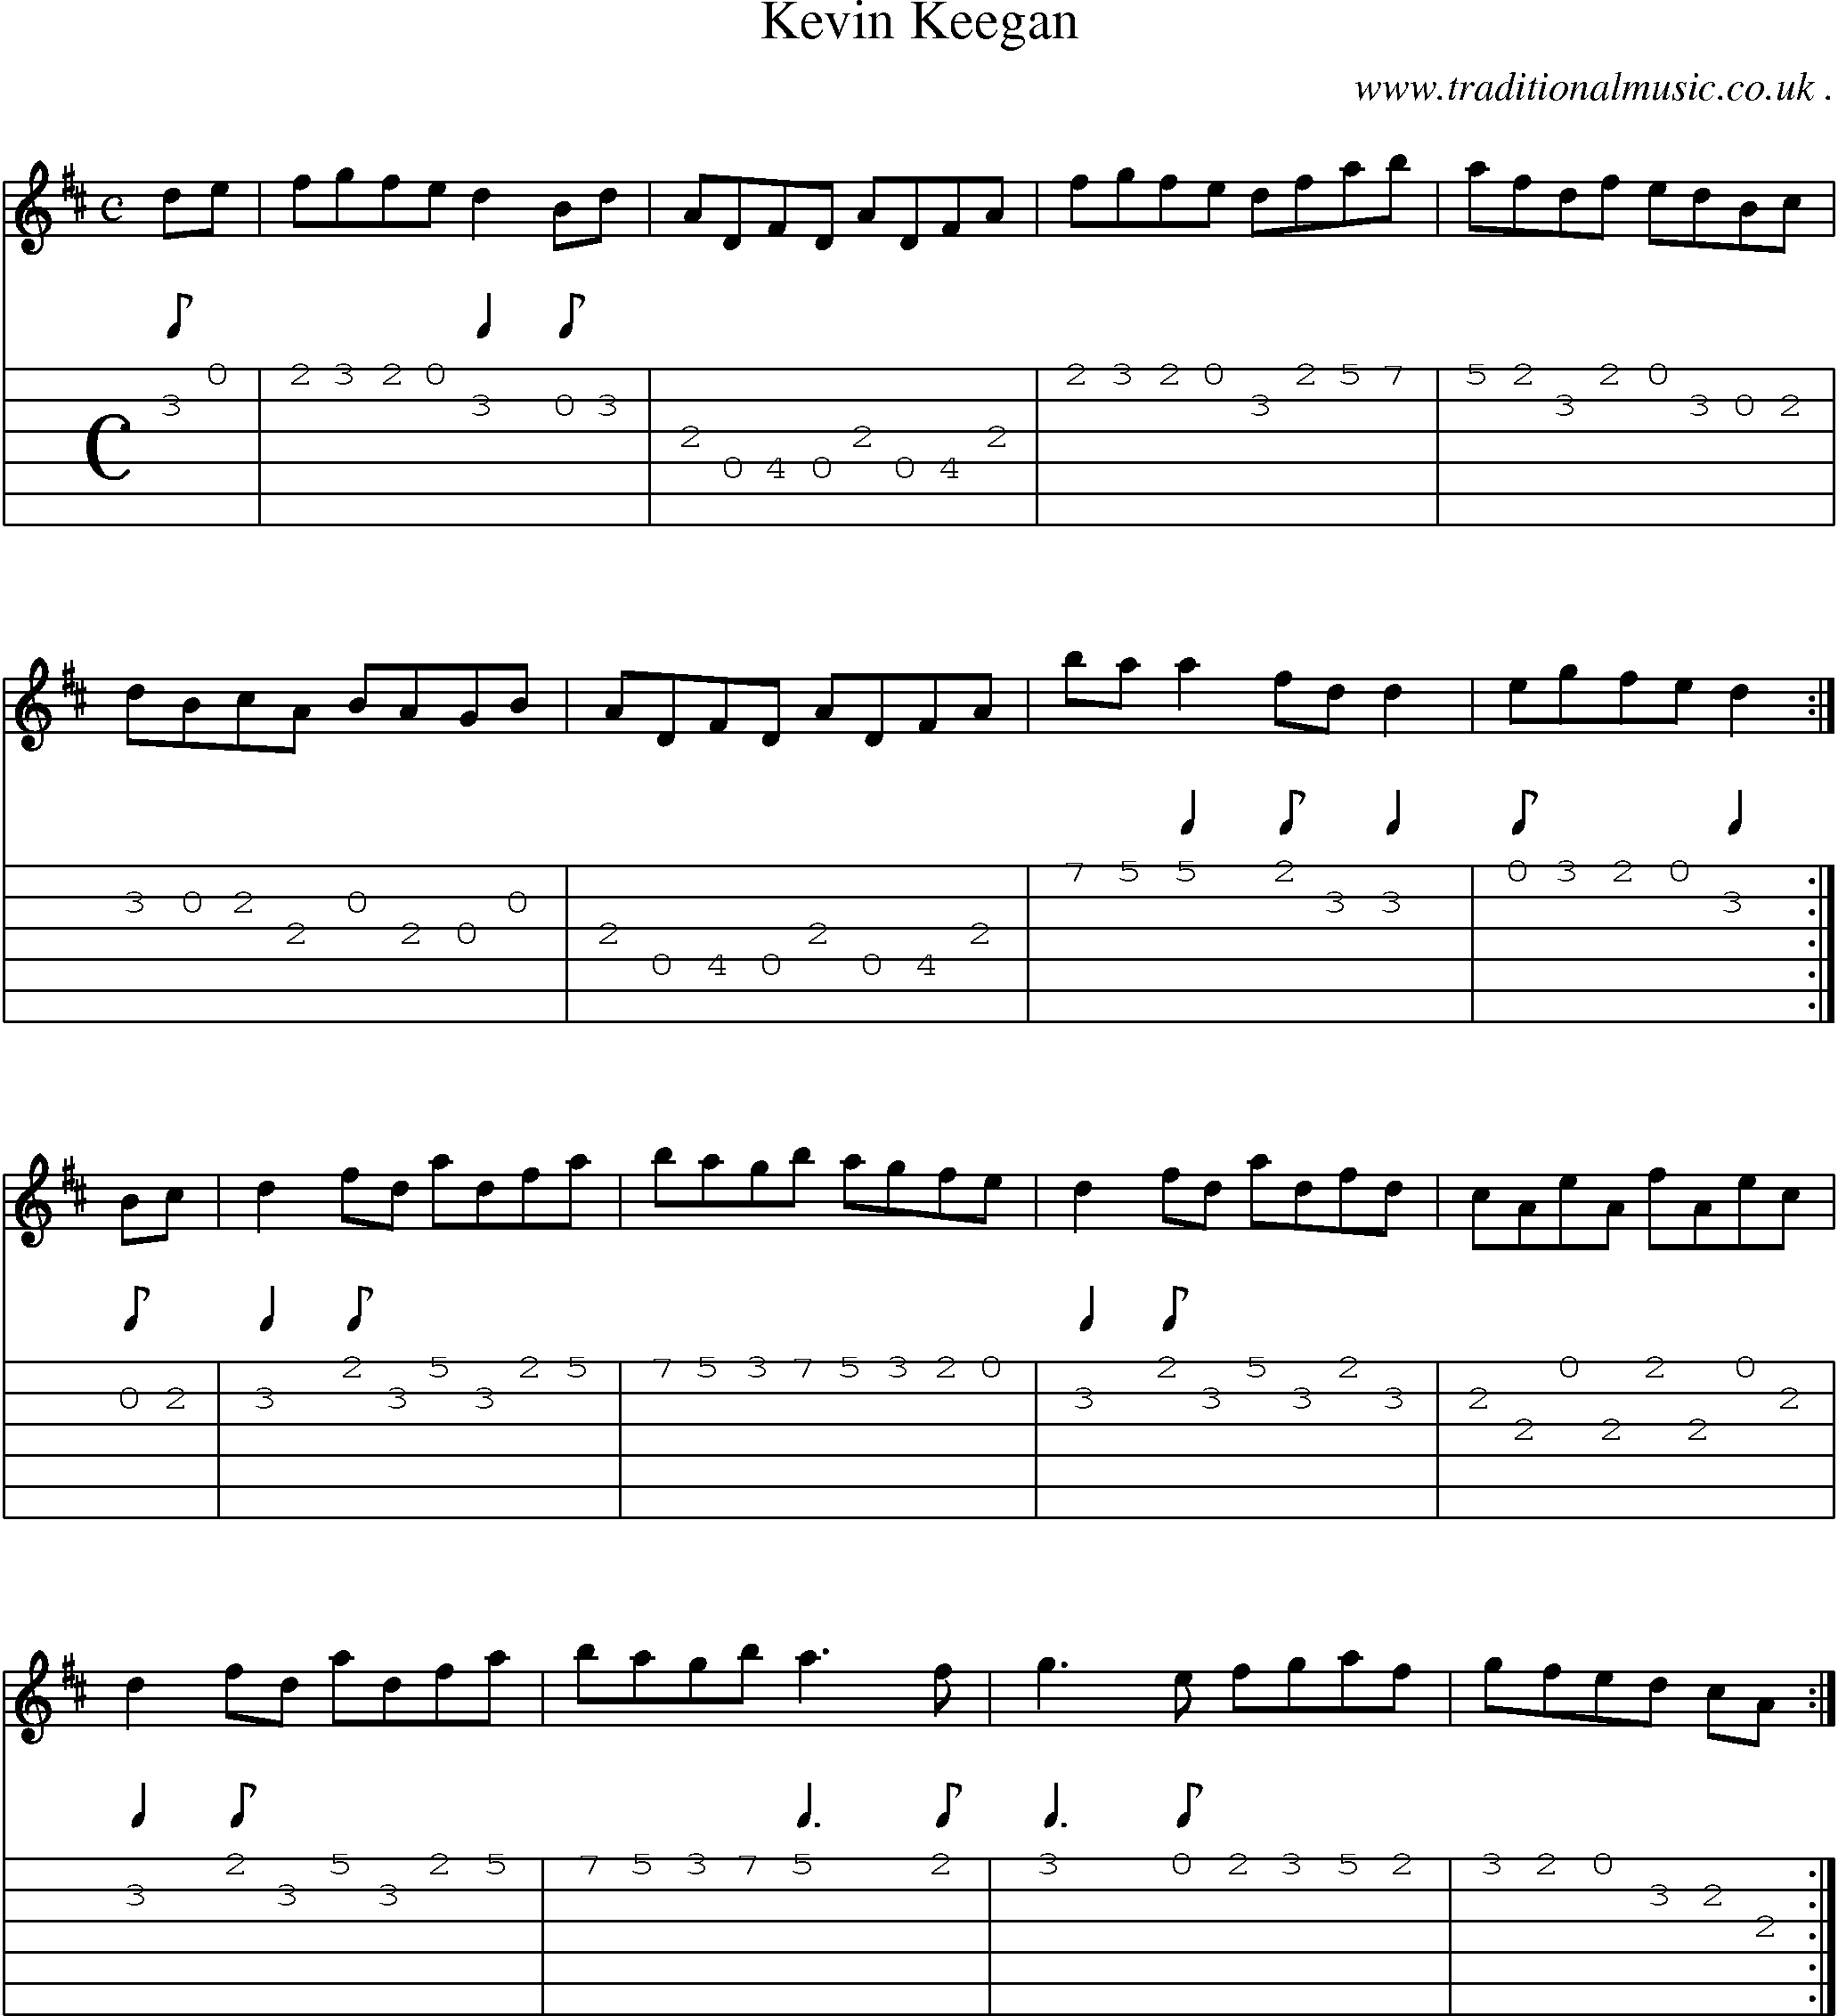 Sheet-Music and Guitar Tabs for Kevin Keegan